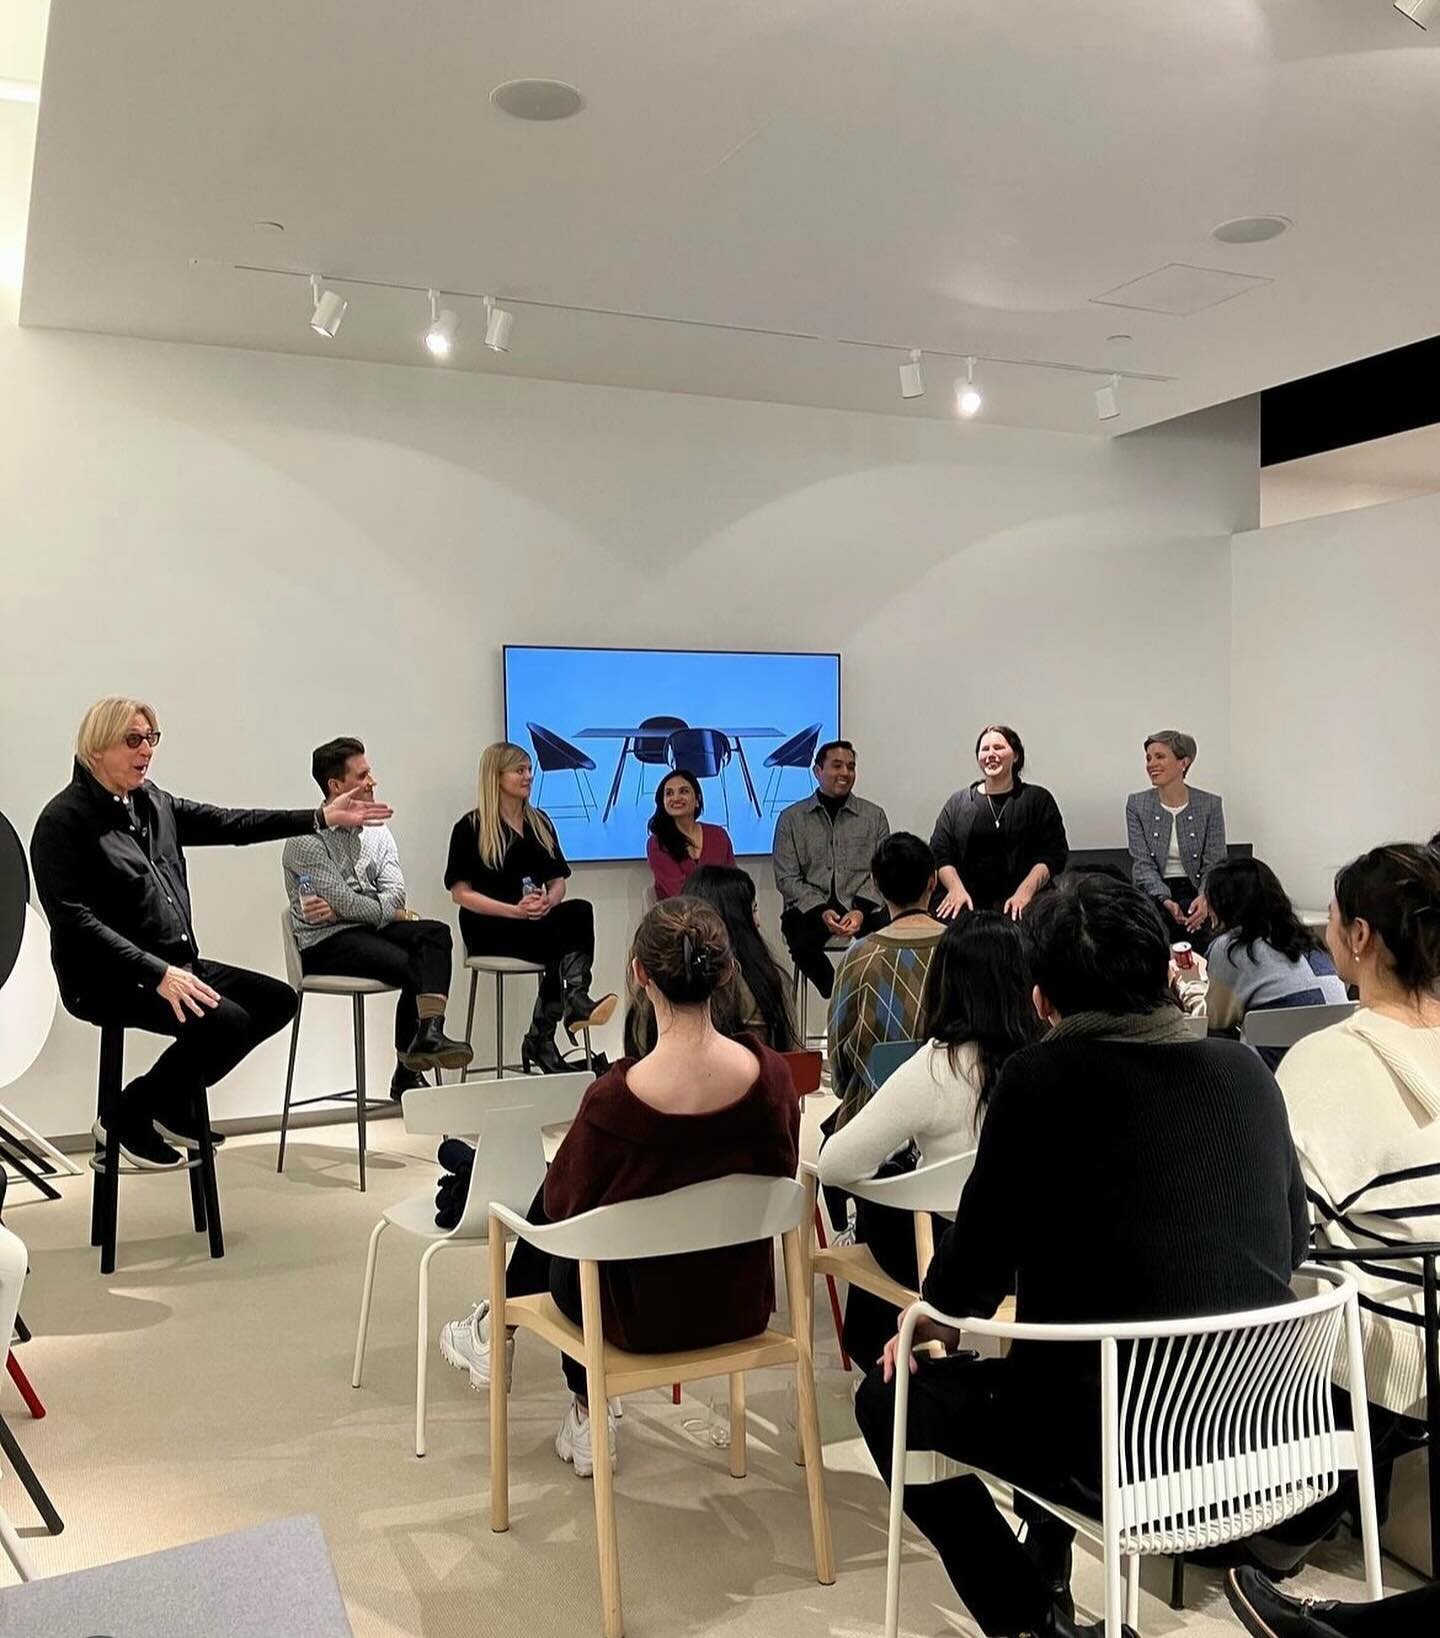 When the alma mater beckons 👩&zwj;🎓✨
Such a fun night, being on the panel to encourage Pratt students at the annual Paths from Pratt event hosted by @bdesignny . I enjoyed meeting the students, learning about them and sharing my experiences#pathsfr